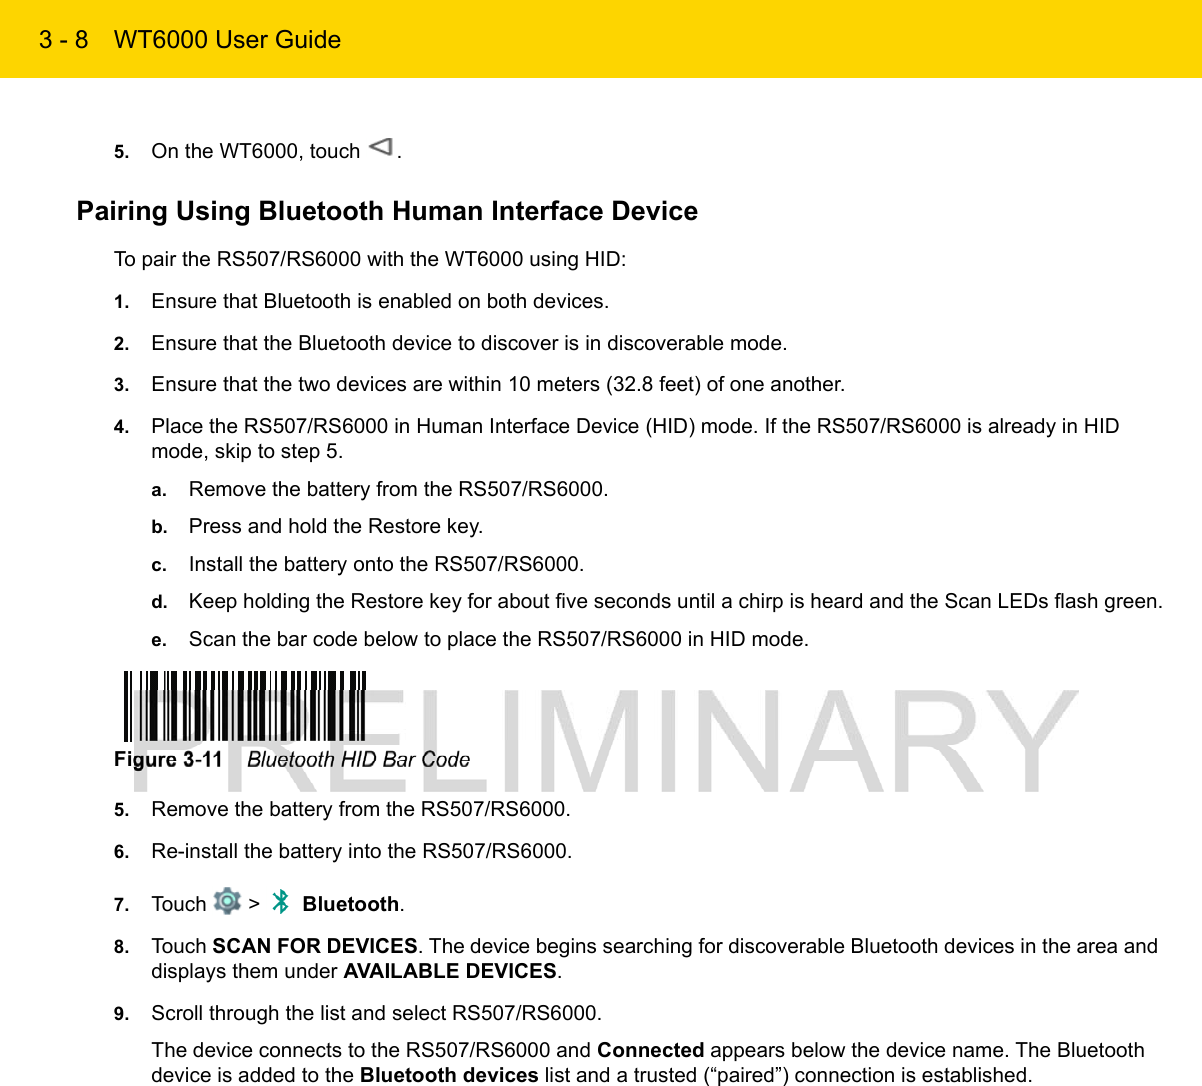 3 - 8 WT6000 User Guide5. On the WT6000, touch  .Pairing Using Bluetooth Human Interface DeviceTo pair the RS507/RS6000 with the WT6000 using HID:1. Ensure that Bluetooth is enabled on both devices.2. Ensure that the Bluetooth device to discover is in discoverable mode.3. Ensure that the two devices are within 10 meters (32.8 feet) of one another.4. Place the RS507/RS6000 in Human Interface Device (HID) mode. If the RS507/RS6000 is already in HID mode, skip to step 5.a. Remove the battery from the RS507/RS6000.b. Press and hold the Restore key.c. Install the battery onto the RS507/RS6000.d. Keep holding the Restore key for about five seconds until a chirp is heard and the Scan LEDs flash green.e. Scan the bar code below to place the RS507/RS6000 in HID mode.Figure 3-11    Bluetooth HID Bar Code5. Remove the battery from the RS507/RS6000.6. Re-install the battery into the RS507/RS6000.7. Touch   &gt;   Bluetooth.8. Touch SCAN FOR DEVICES. The device begins searching for discoverable Bluetooth devices in the area and displays them under AVAILABLE DEVICES.9. Scroll through the list and select RS507/RS6000.The device connects to the RS507/RS6000 and Connected appears below the device name. The Bluetooth device is added to the Bluetooth devices list and a trusted (“paired”) connection is established.